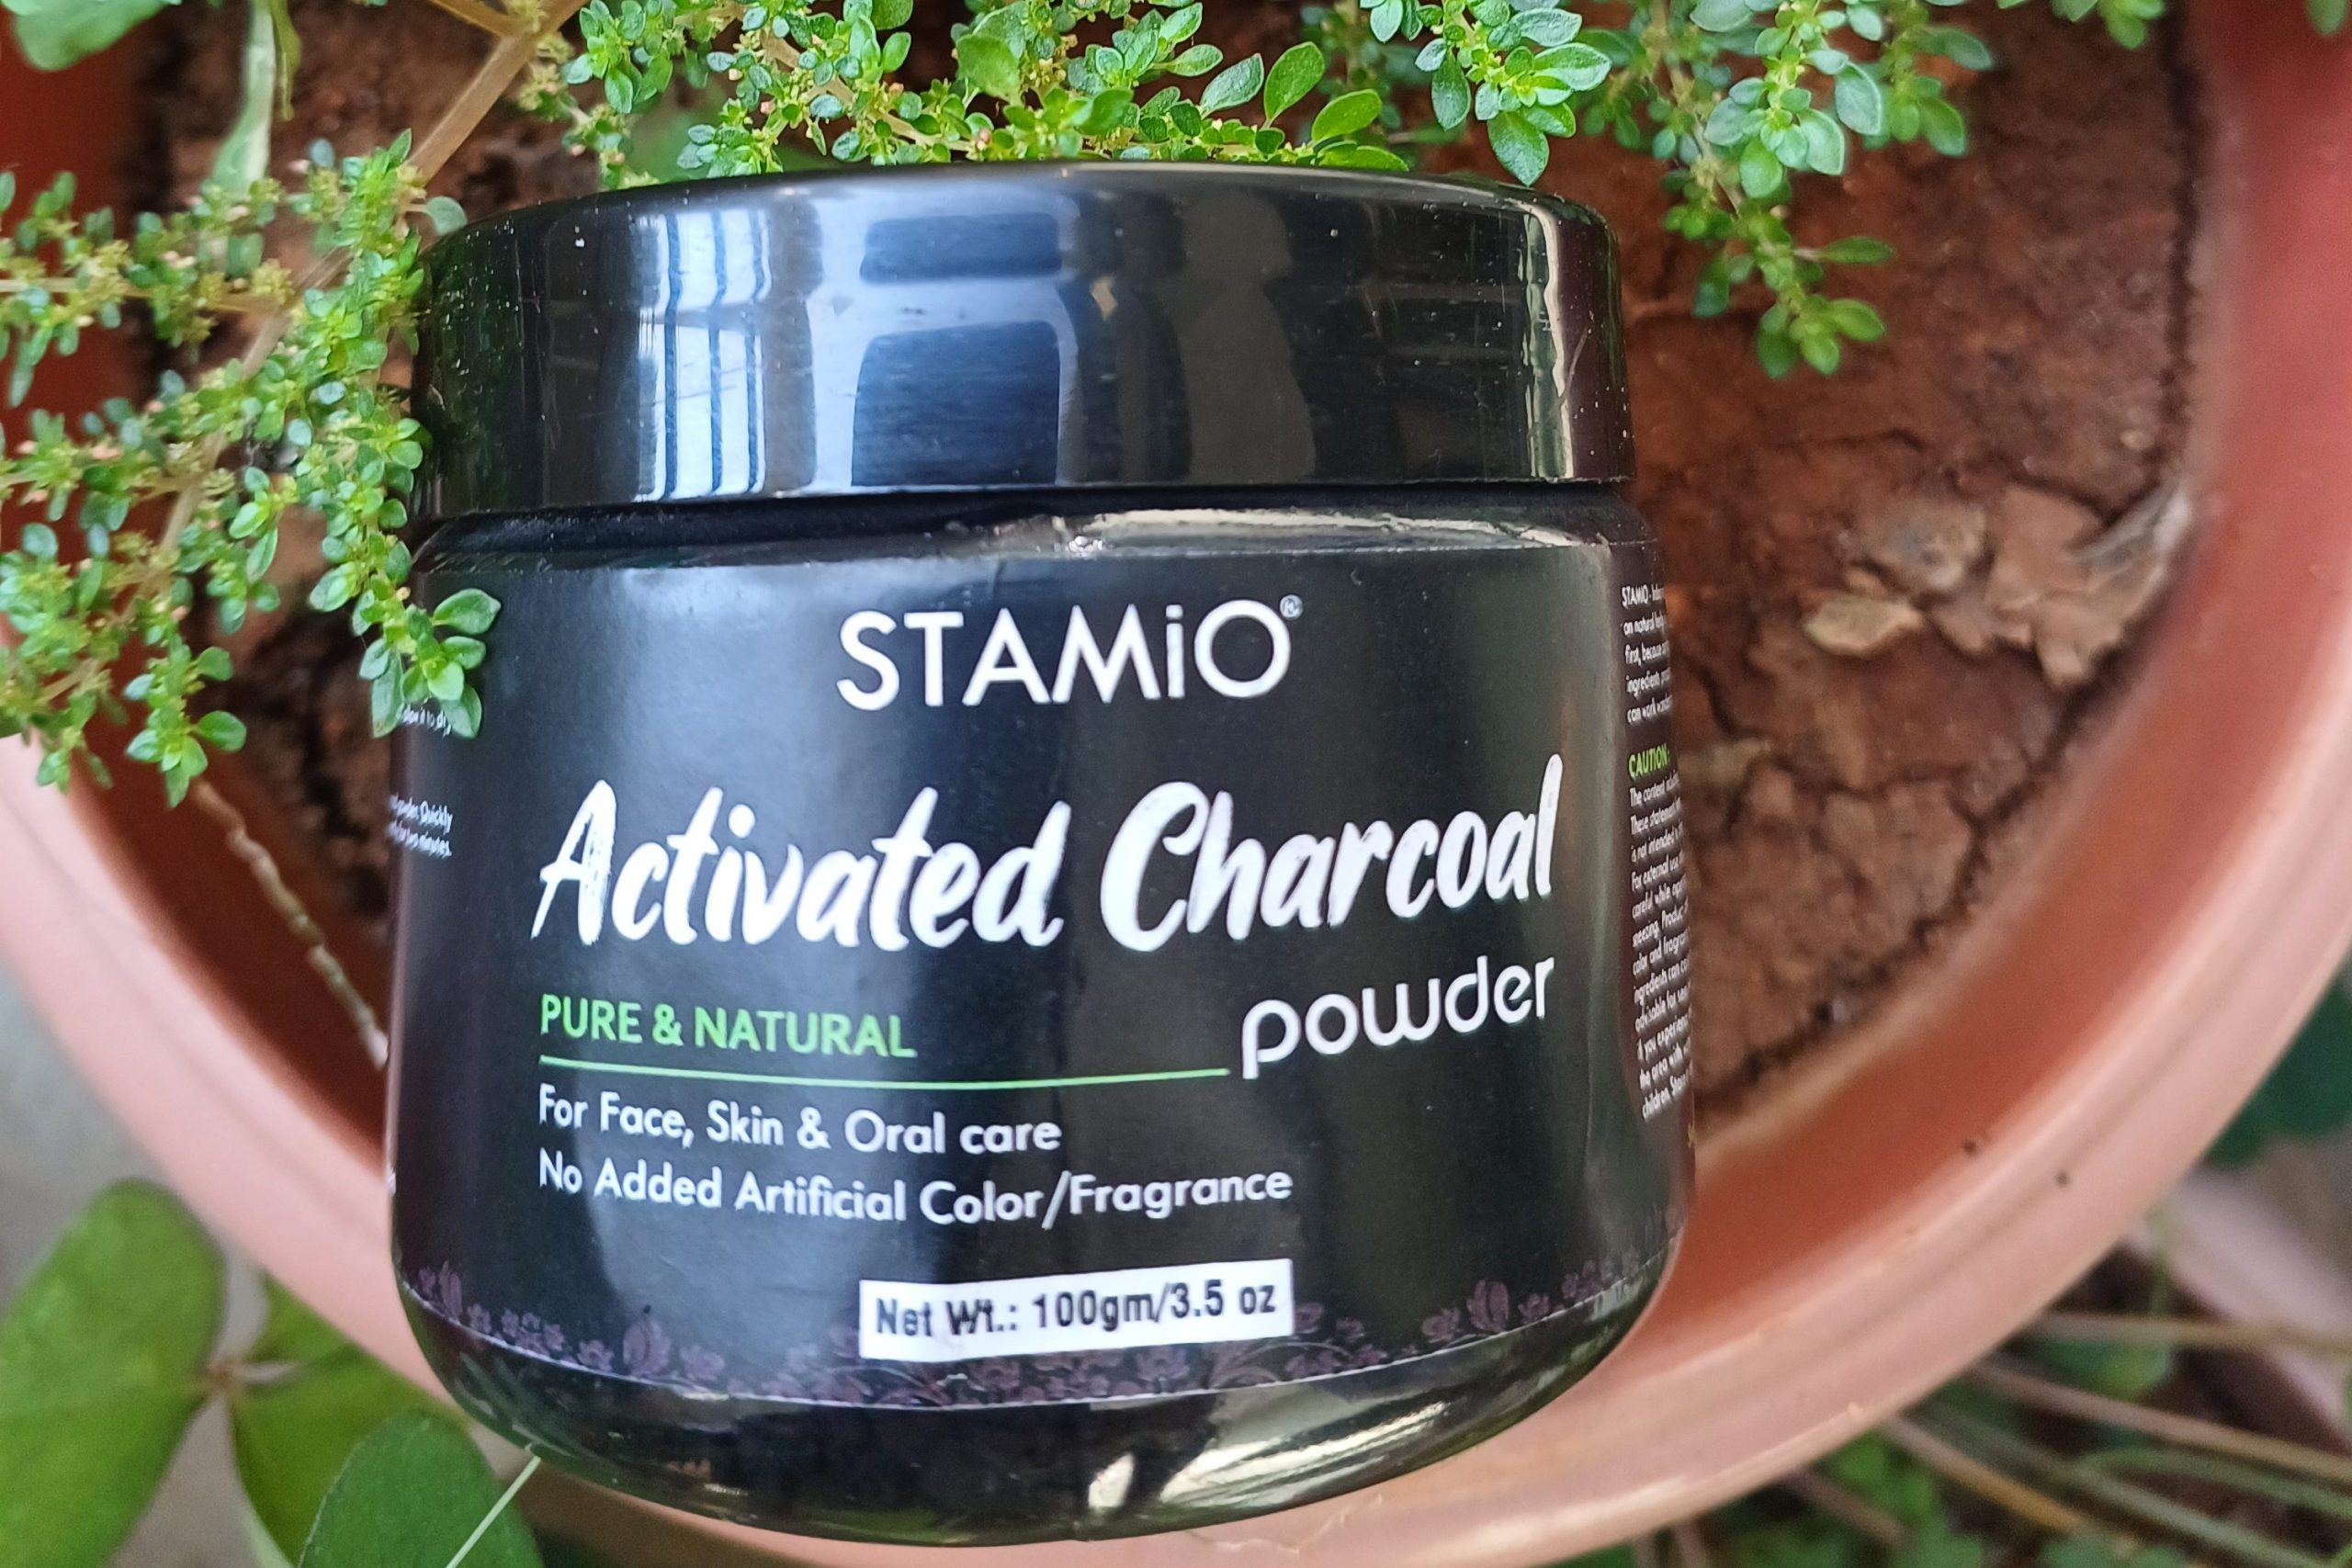 Stamio Activated Charcoal Powder Review